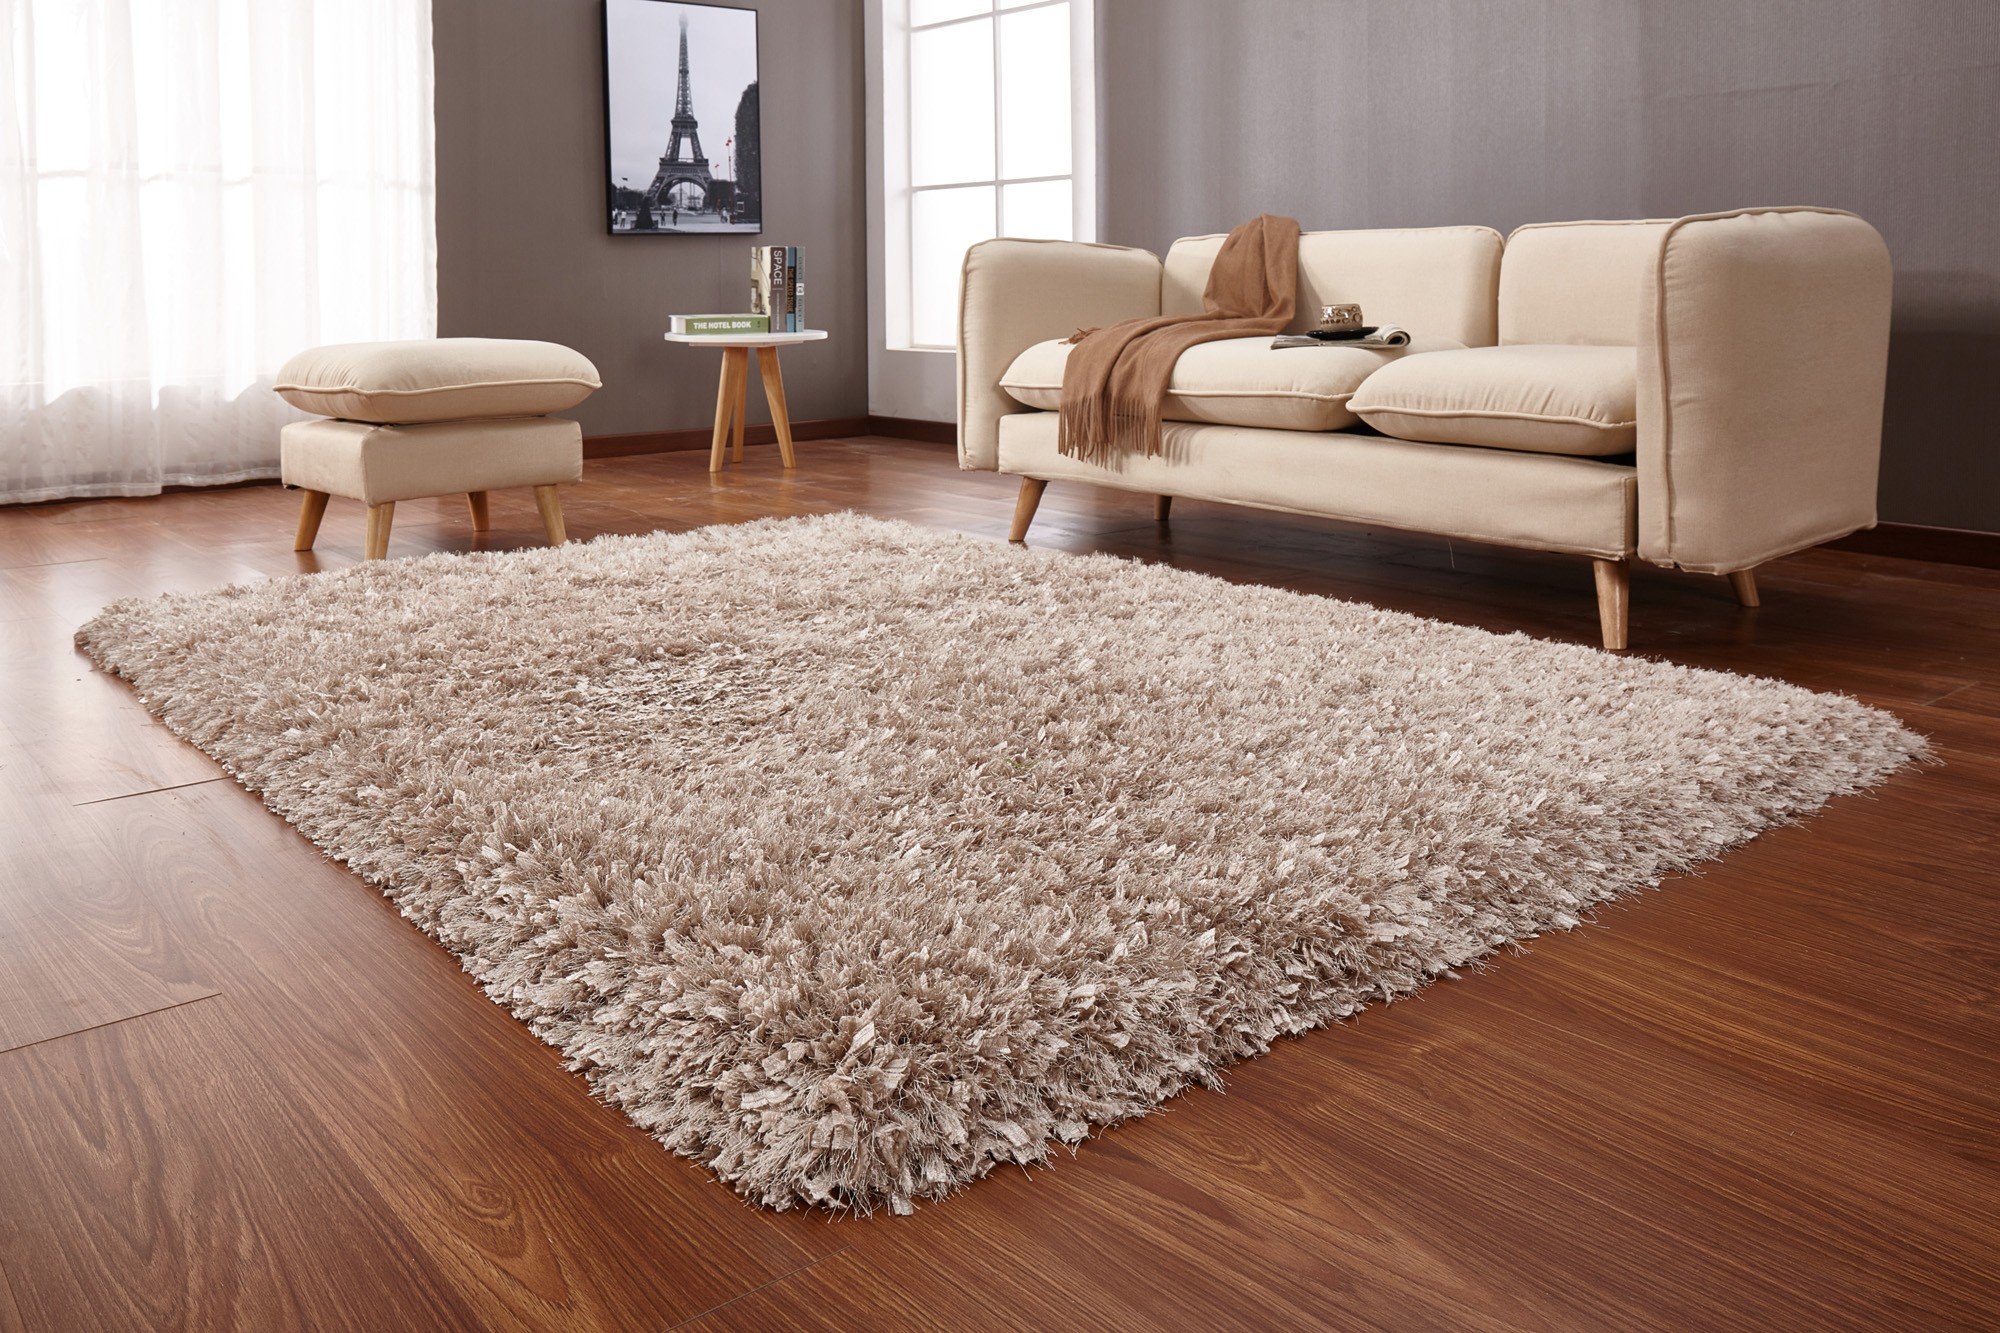 Uncover 67+ Beautiful shaggy rug for living room Top Choices Of Architects